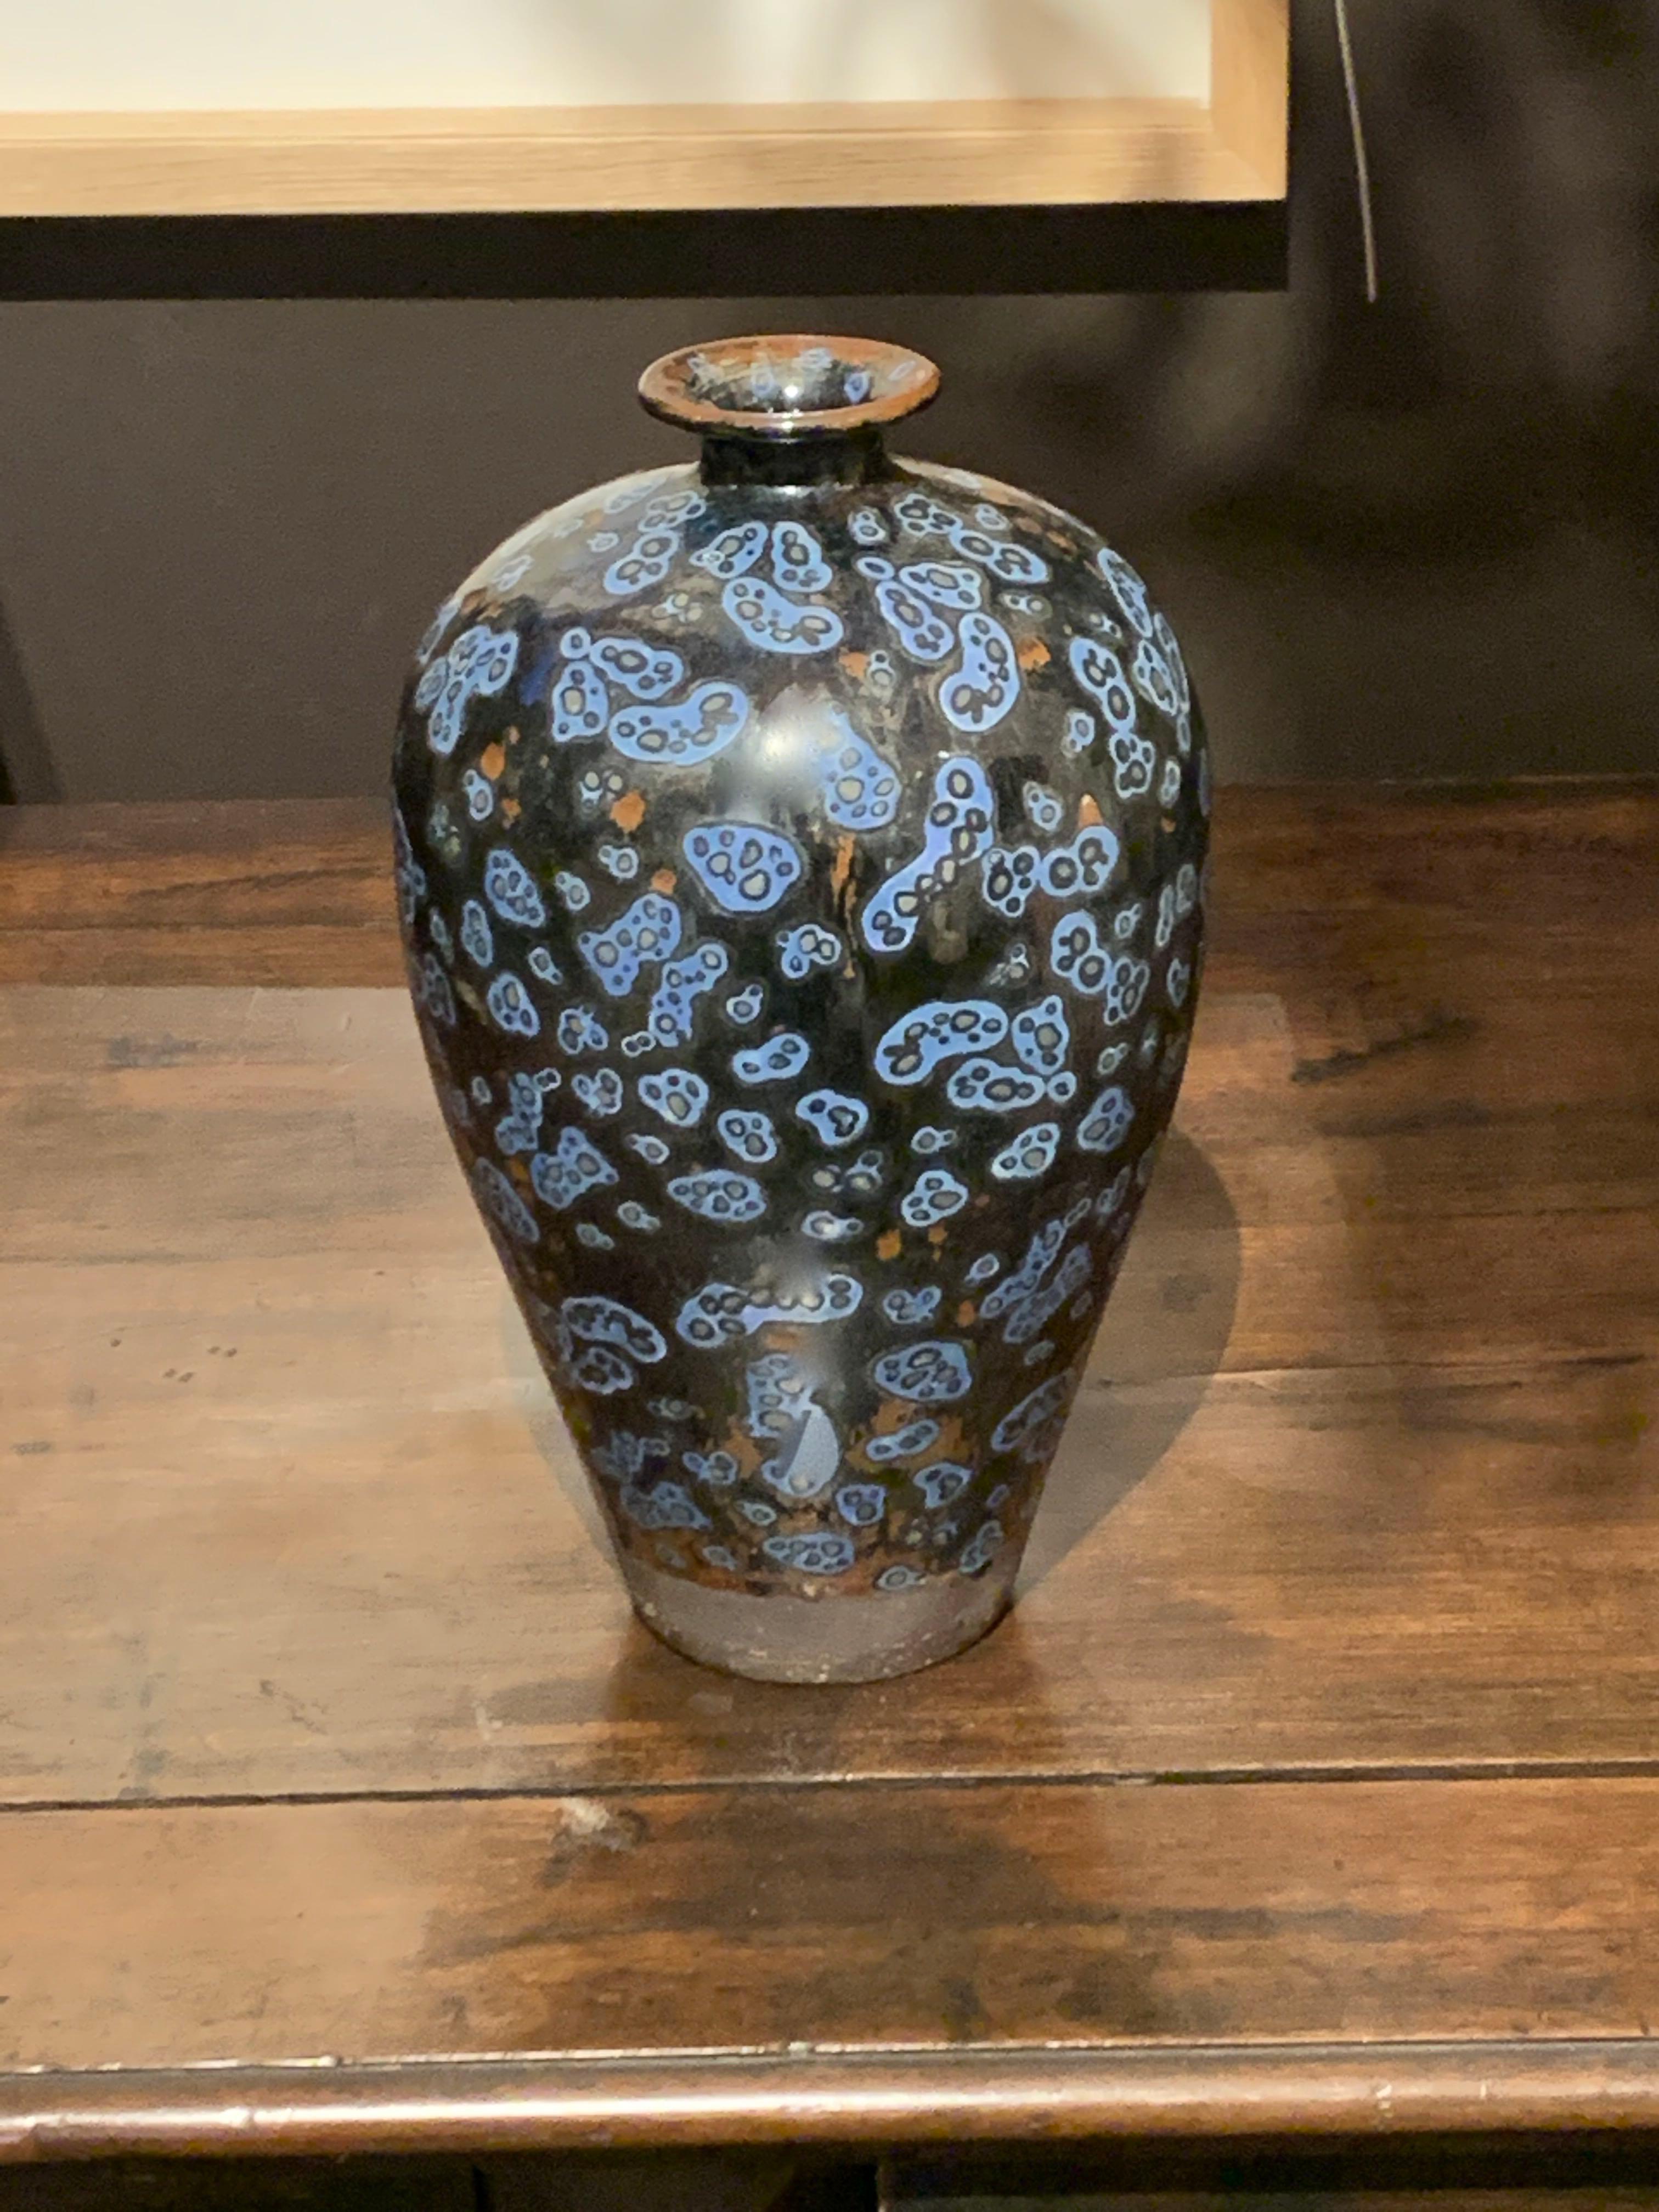 Contemporary Chinese ceramic vase black ground with royal blue squiggle decorative design. Random pops of orange color give the vase a vintage appearance. Natural taupe color band at bottom of vase.
Classic shape.
Two are available and sold